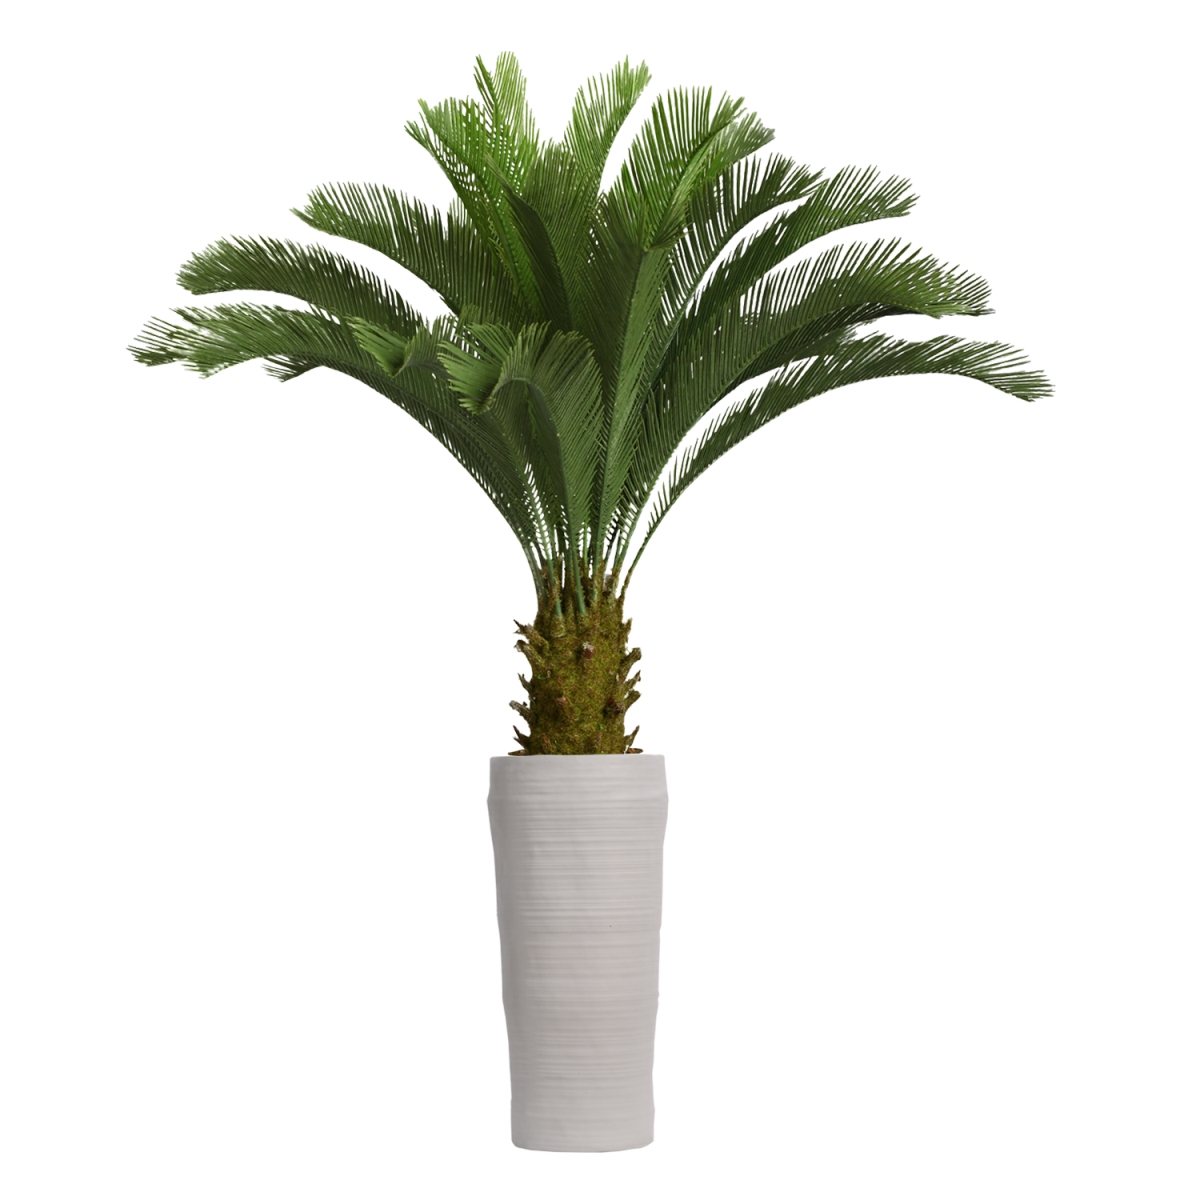 Vhx111218 69 In. Tall Cycas Palm Tree In Planter